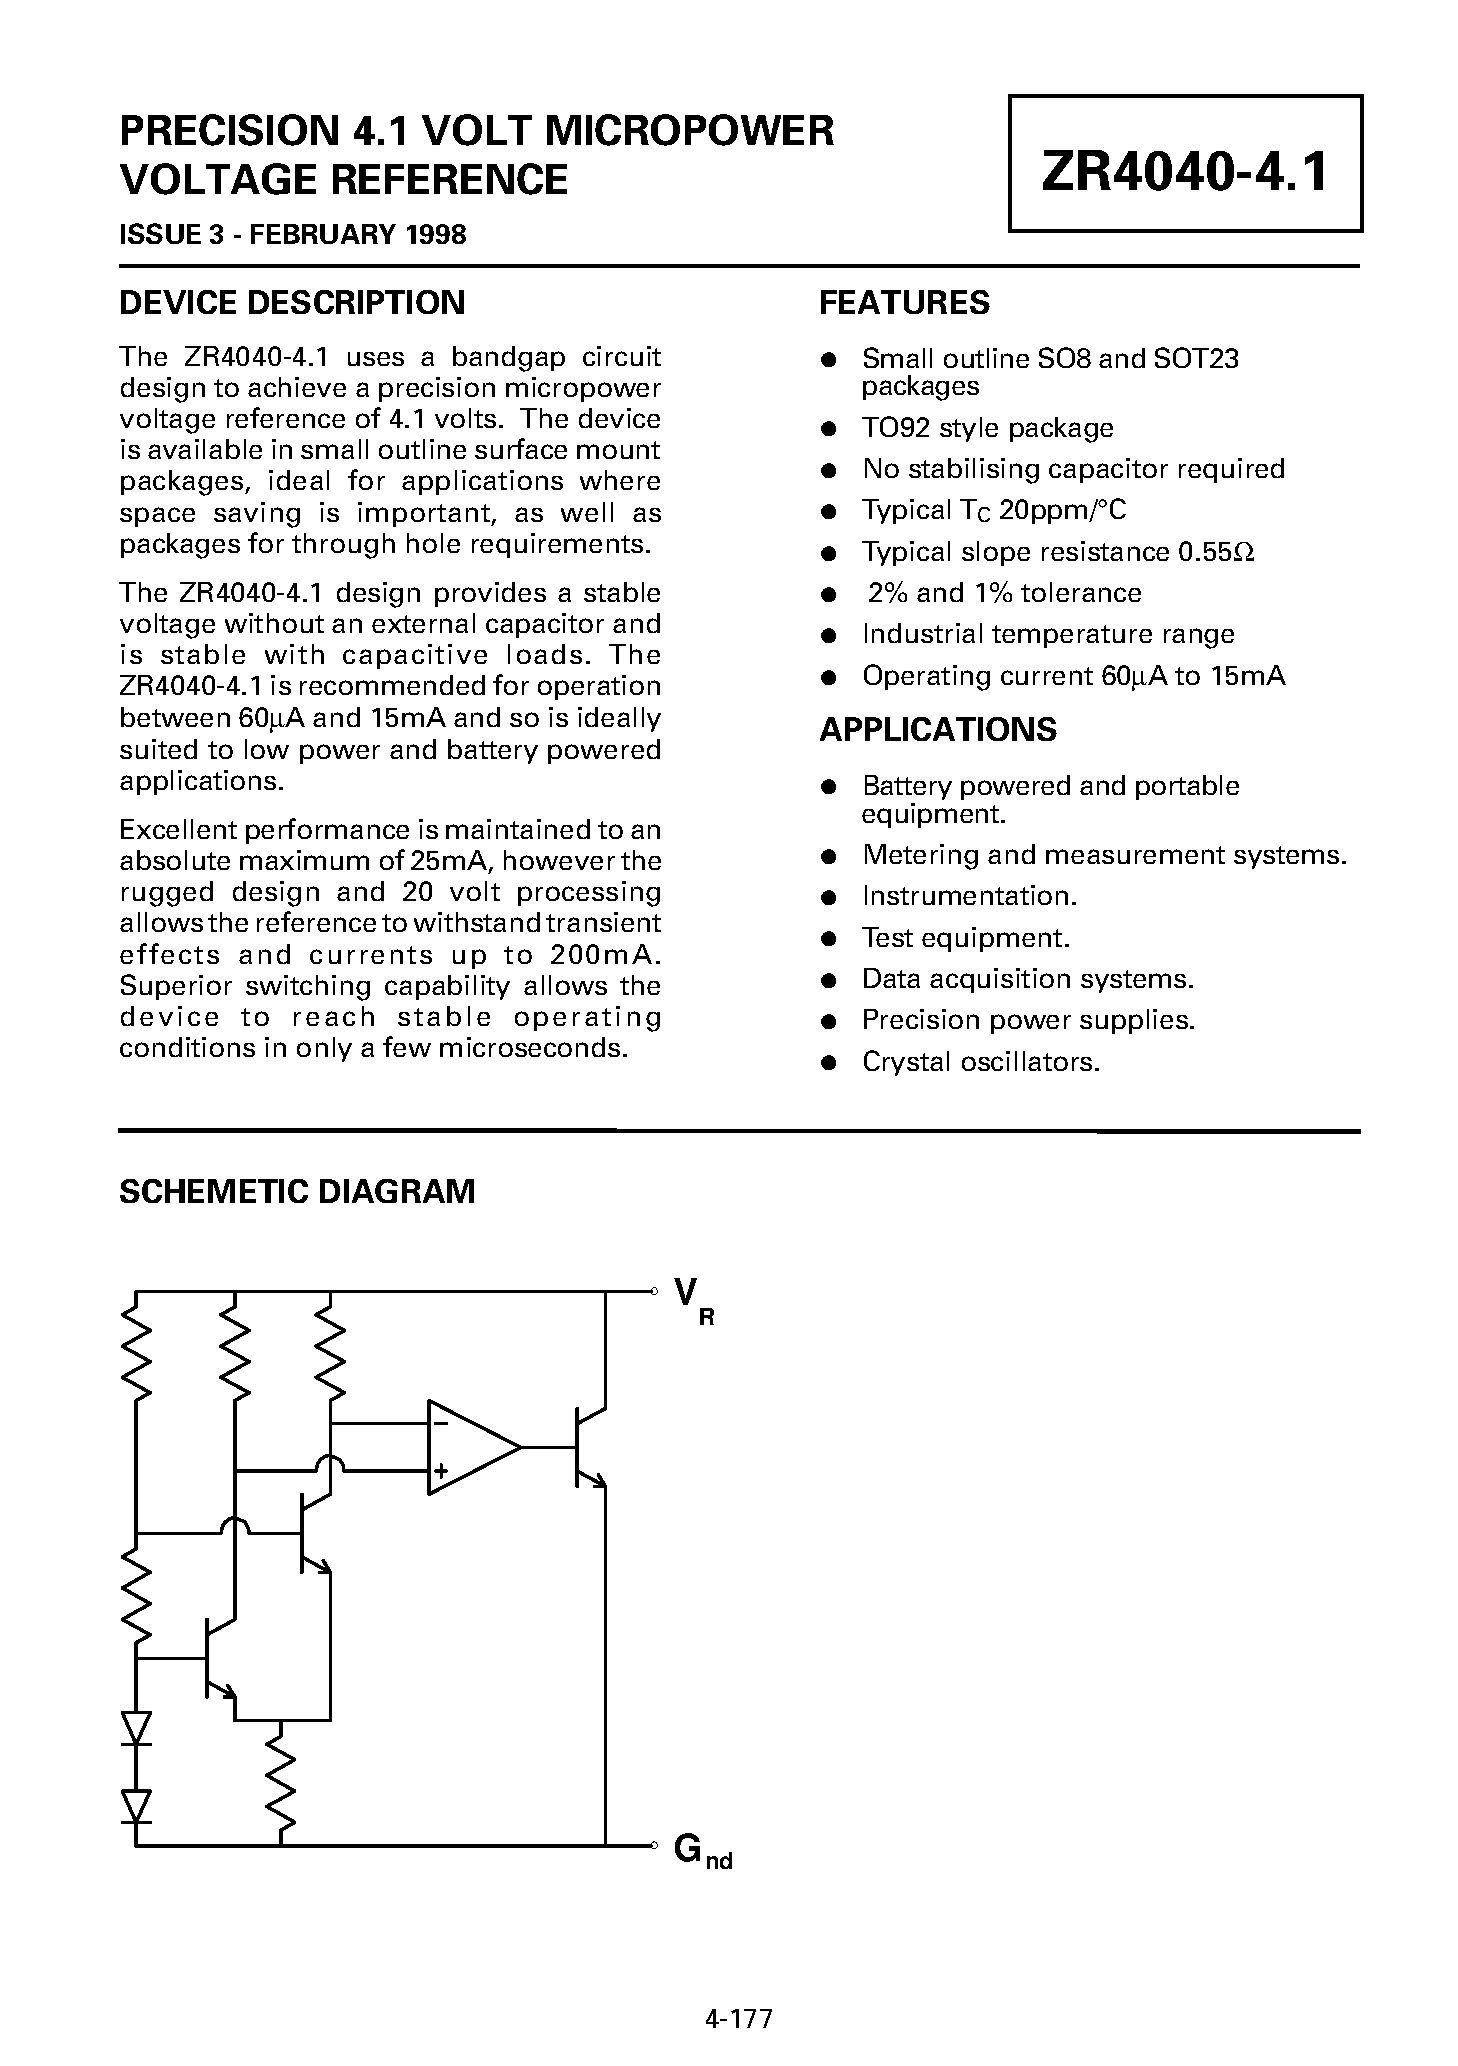 Datasheet ZR40401F41 - PRECISION 4.1 VOLT MICROPOWER VOLTAGE REFERENCE page 1